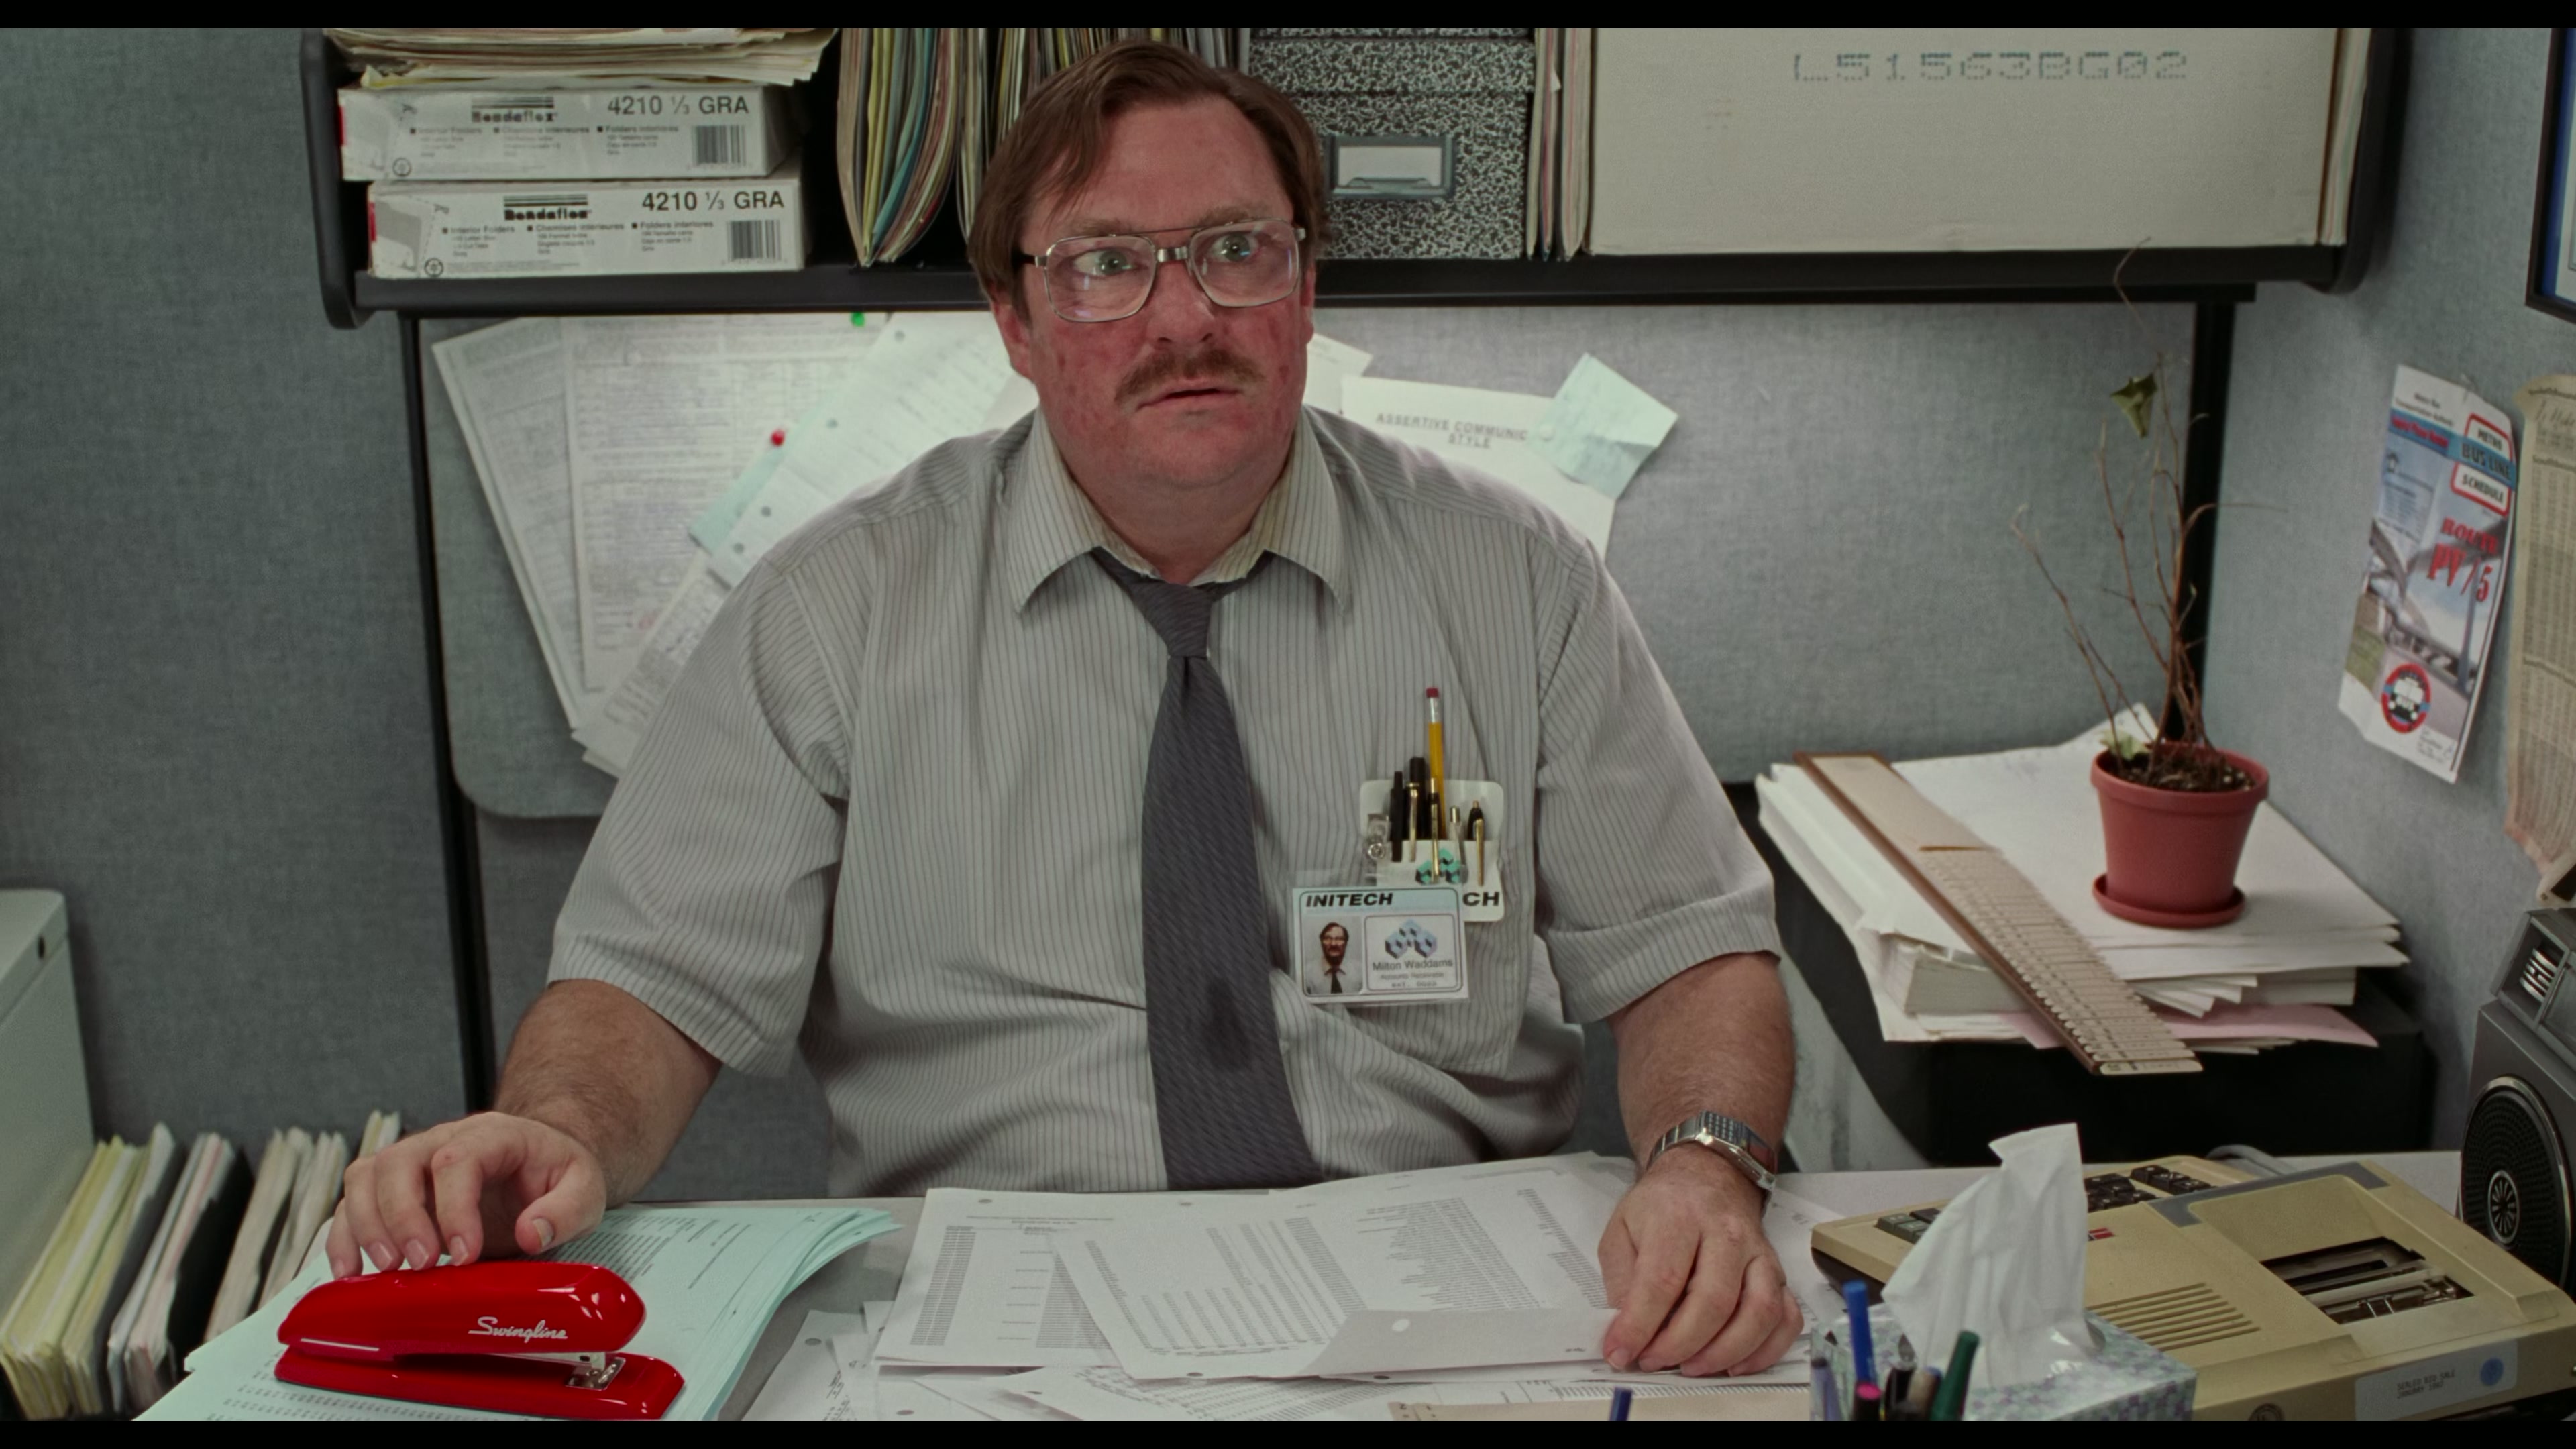 Swingline Stapler (Red) Used By Stephen Root In Office ...